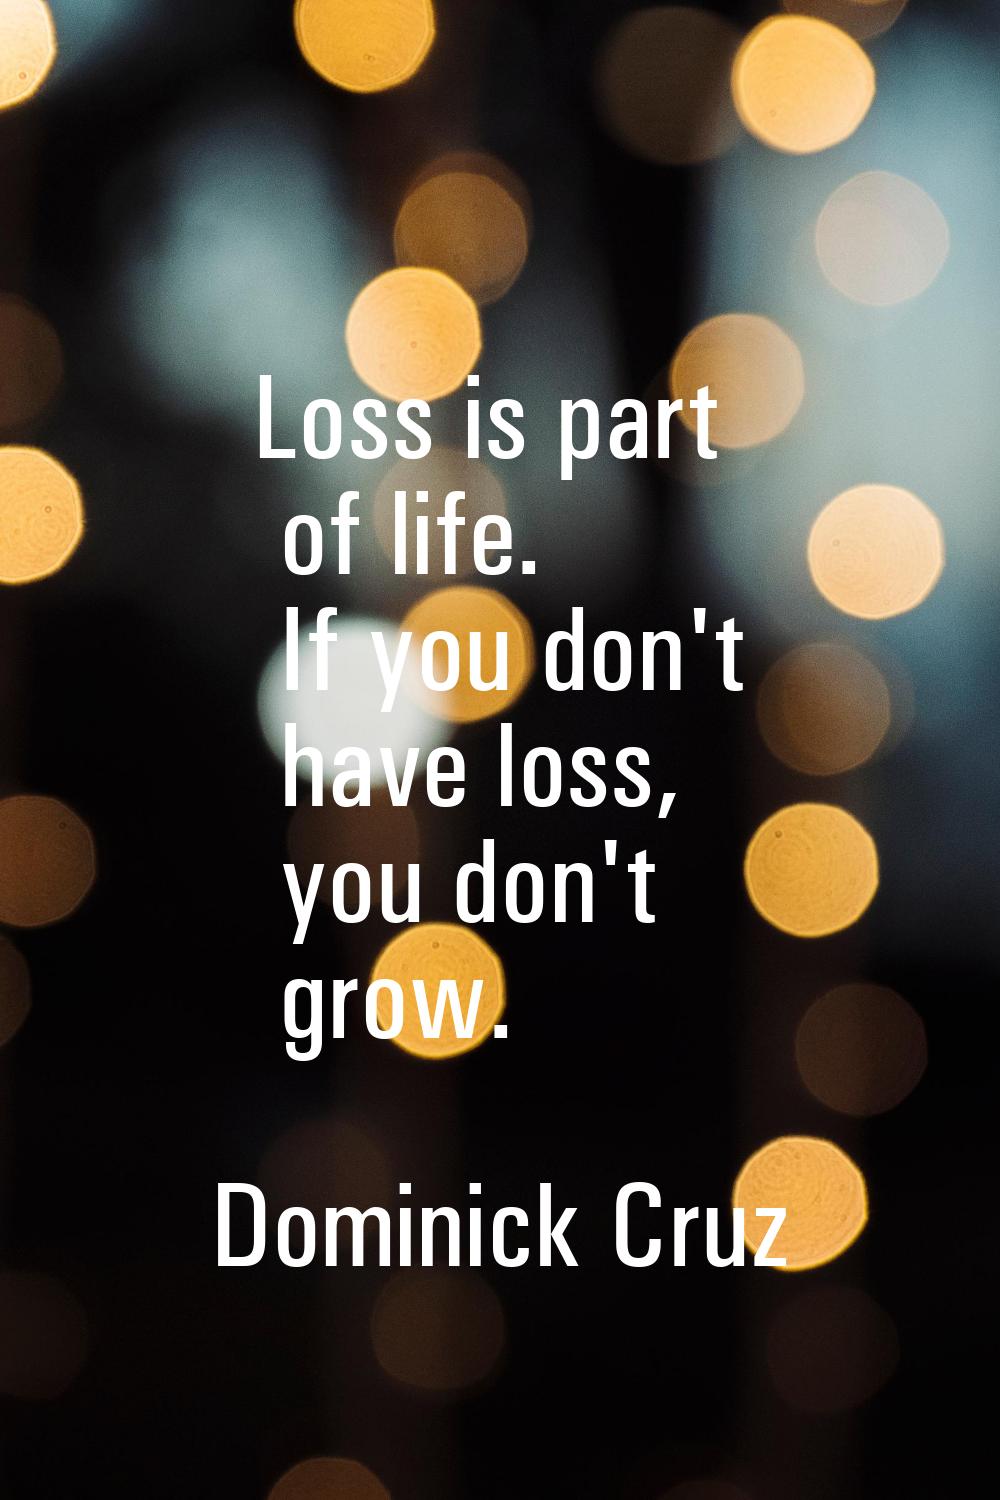 Loss is part of life. If you don't have loss, you don't grow.